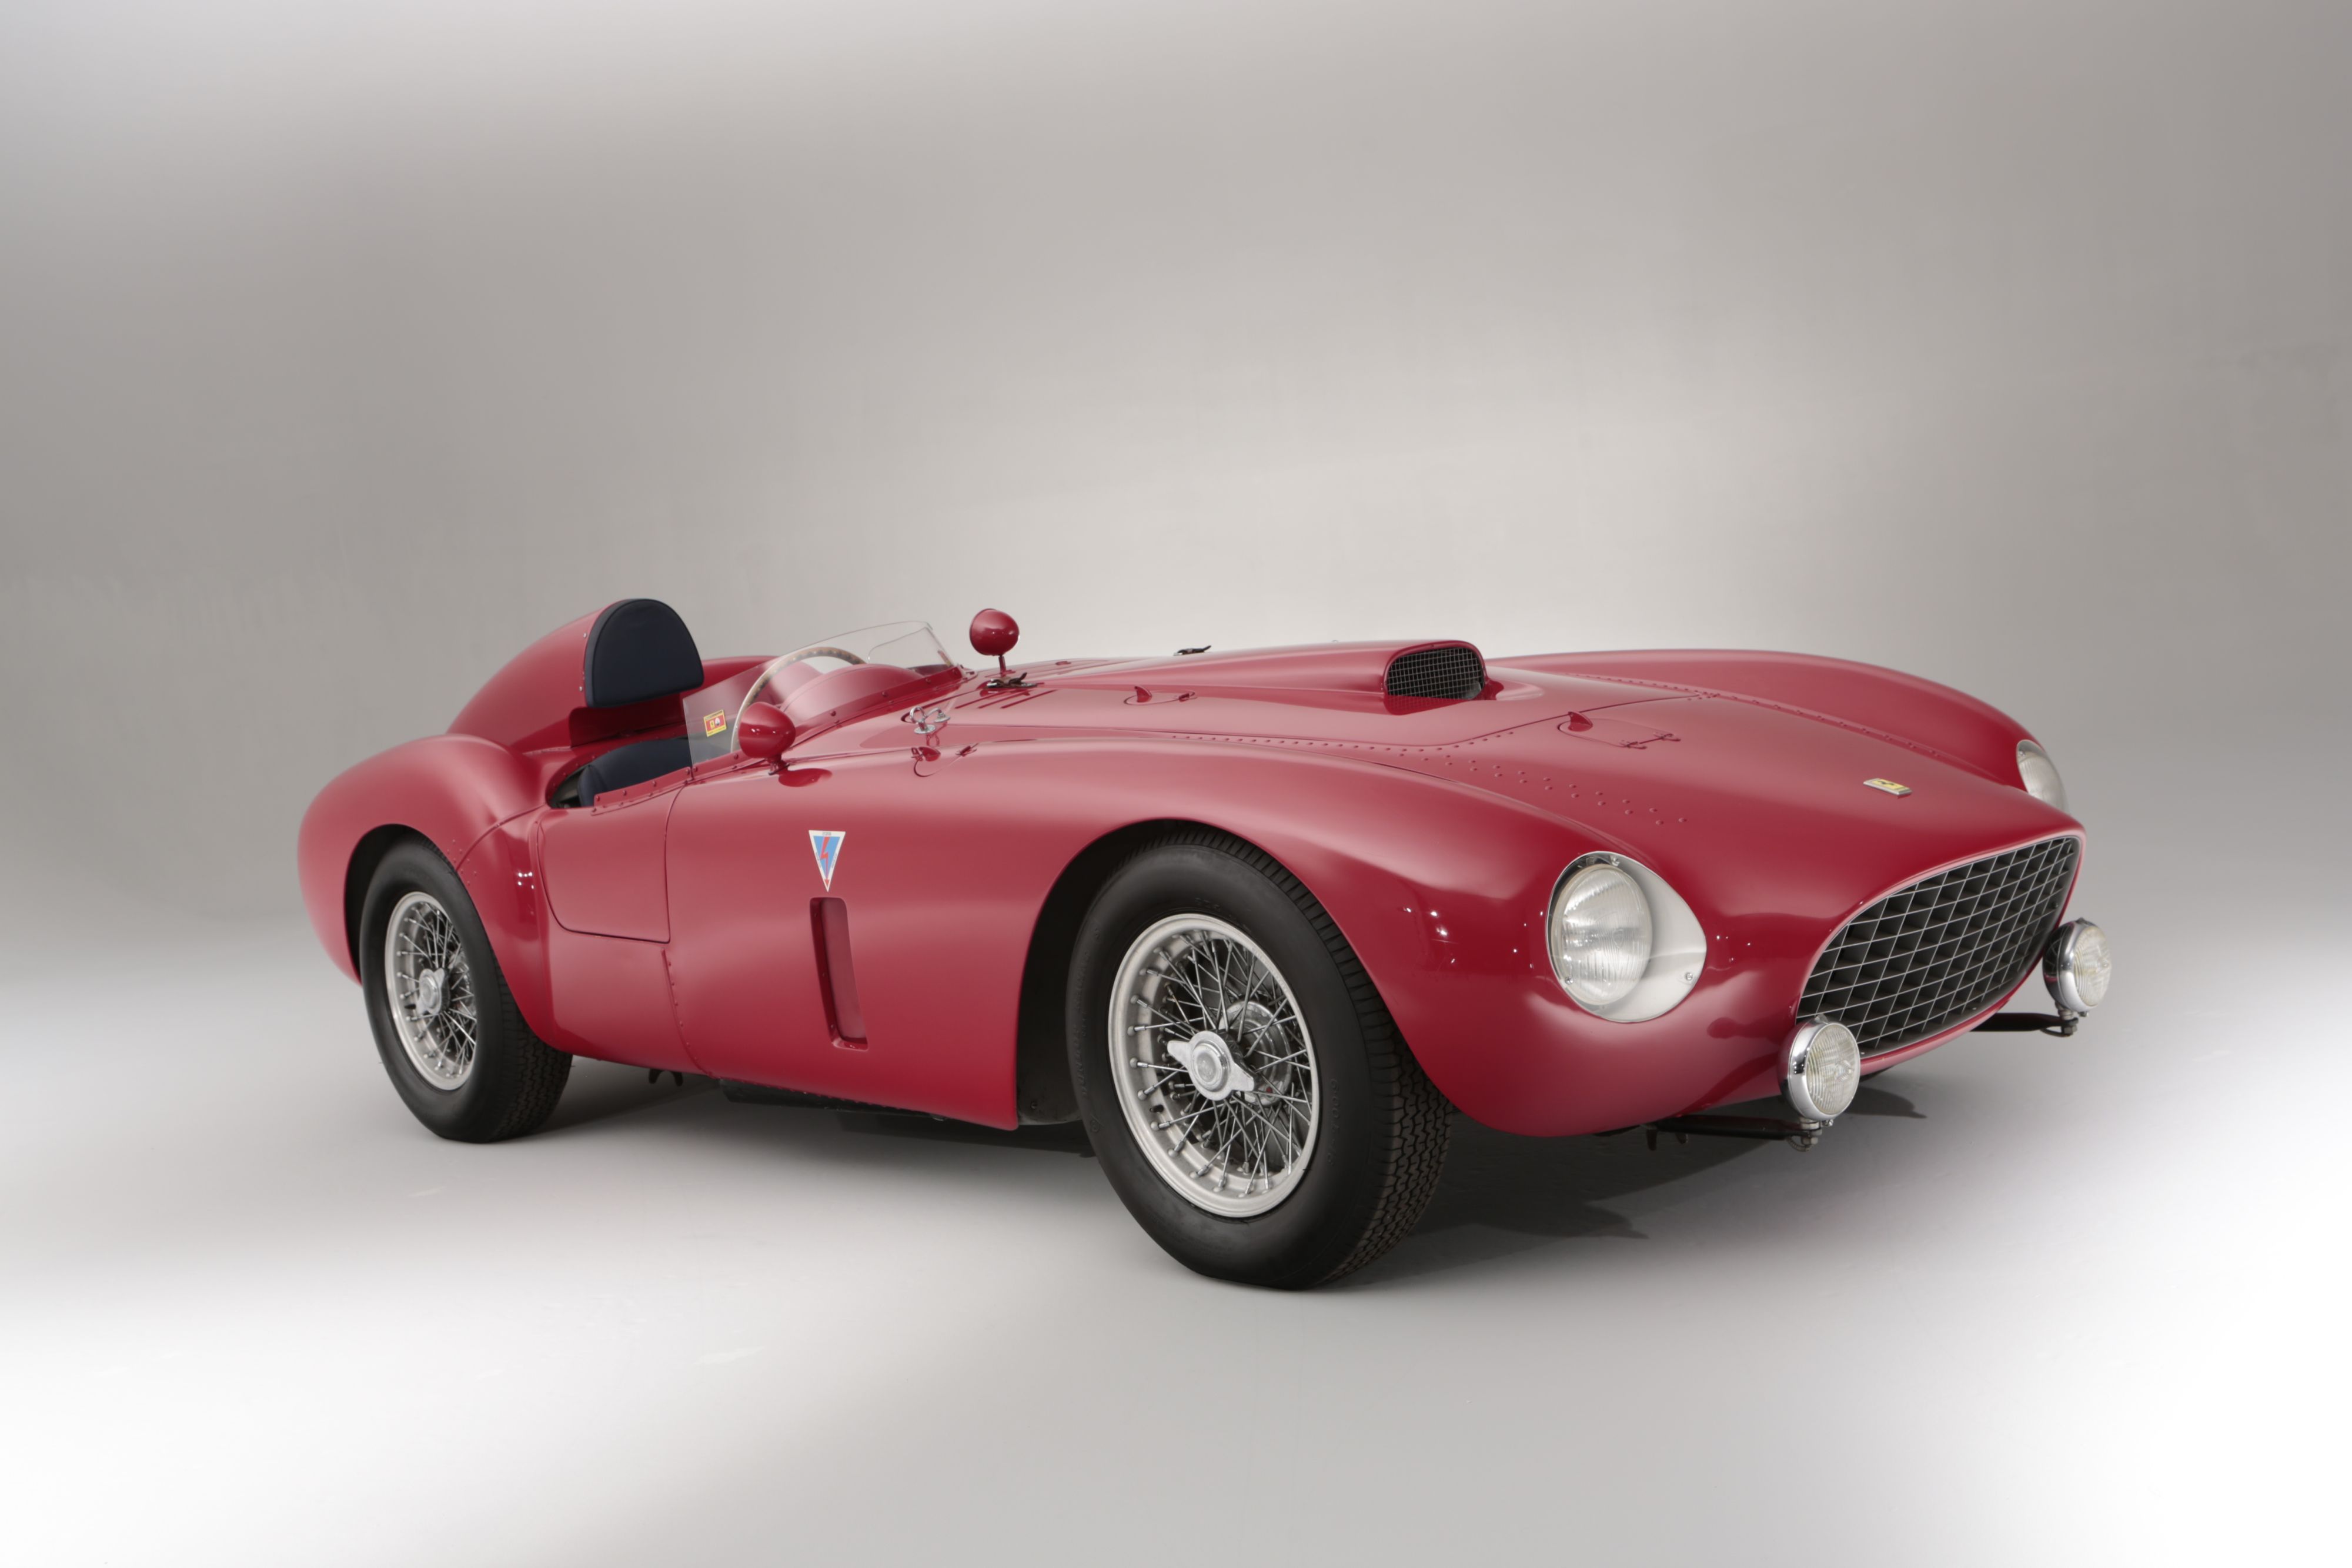 BONHAMS FESTIVAL OF SPEED SALE RACES AHEAD WITH £22.6 MILLION AND A NEW WORLD RECORD cover